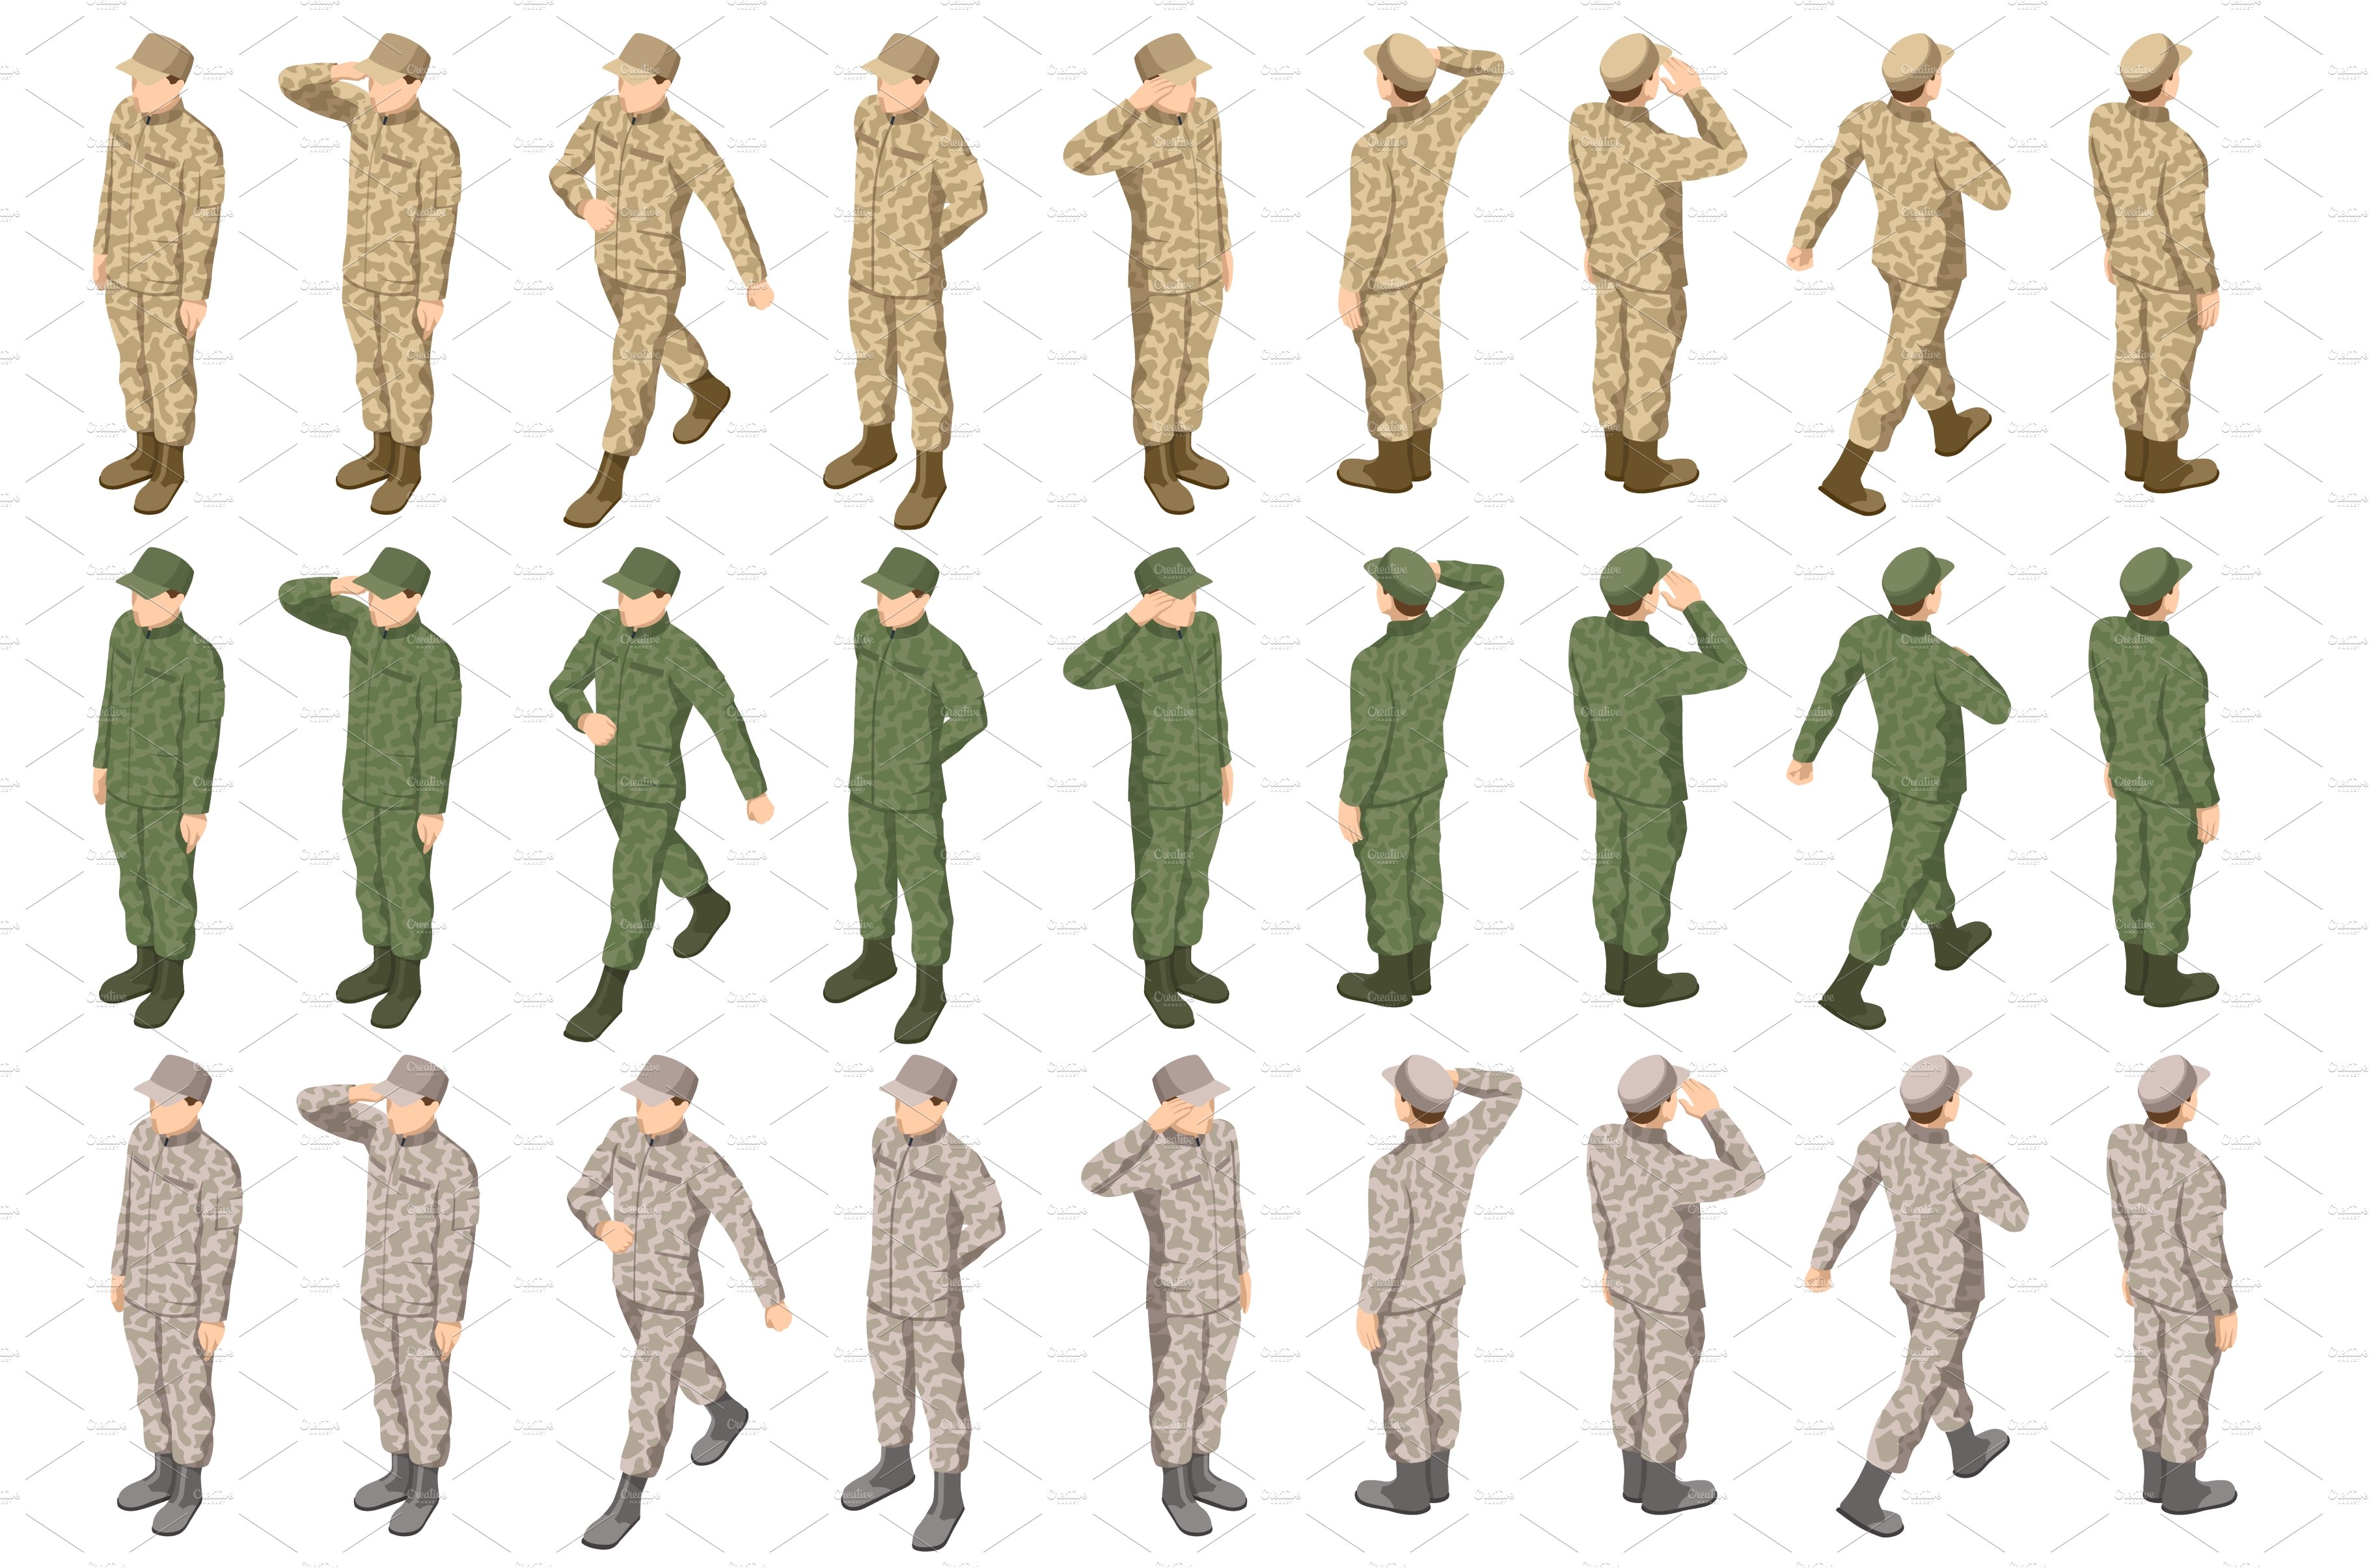 Isometric soldier in camouflage cover image.